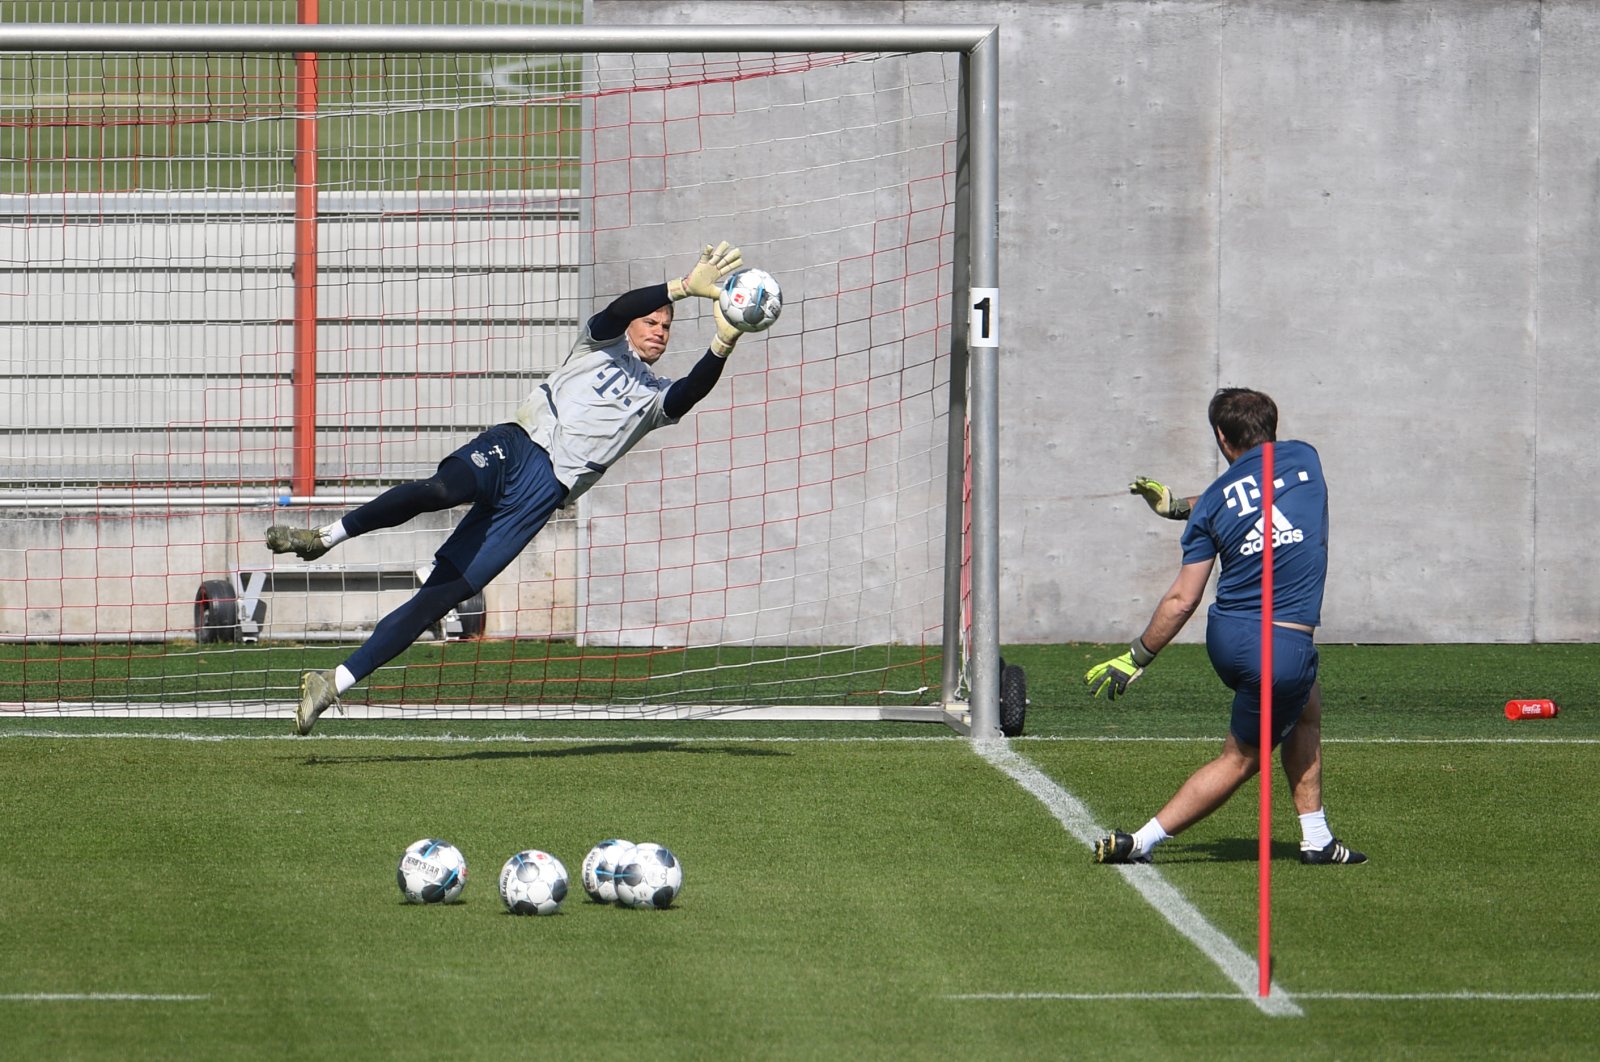 Manuel Neuer (L) during training, in Munich, Germany, Friday, April 24, 2020. (Reuters Photo)